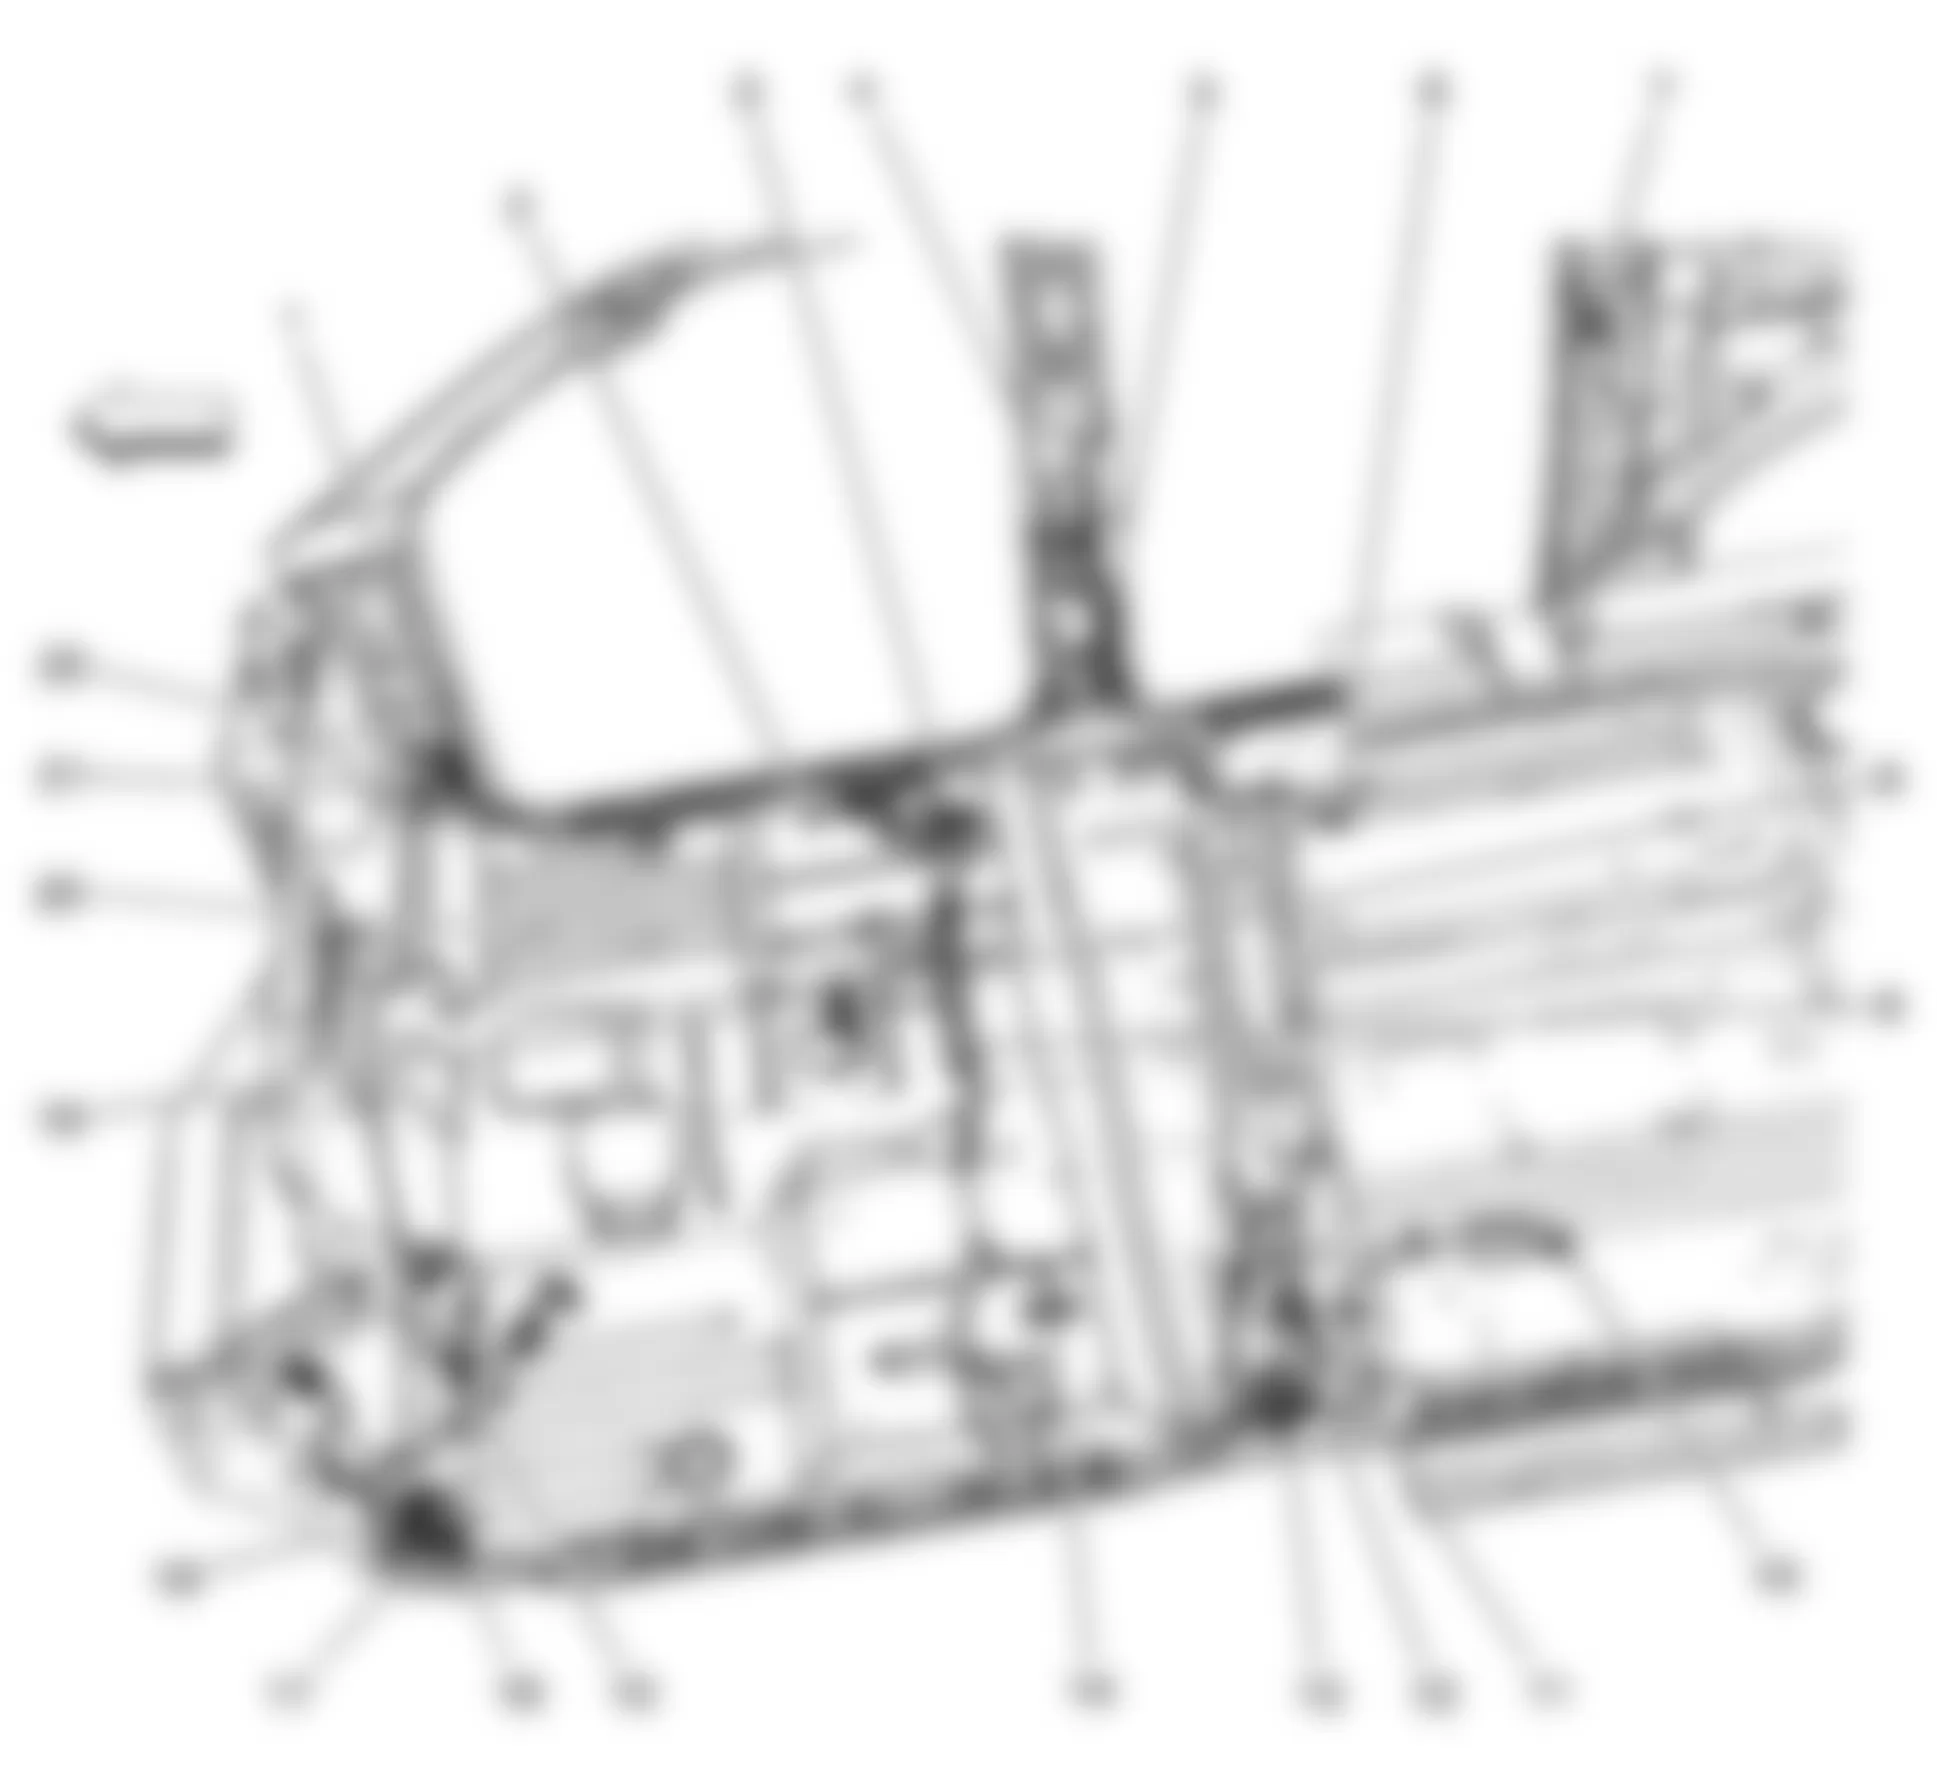 Chevrolet Avalanche 2010 - Component Locations -  Front Passenger Compartment (Long Wheel Base)